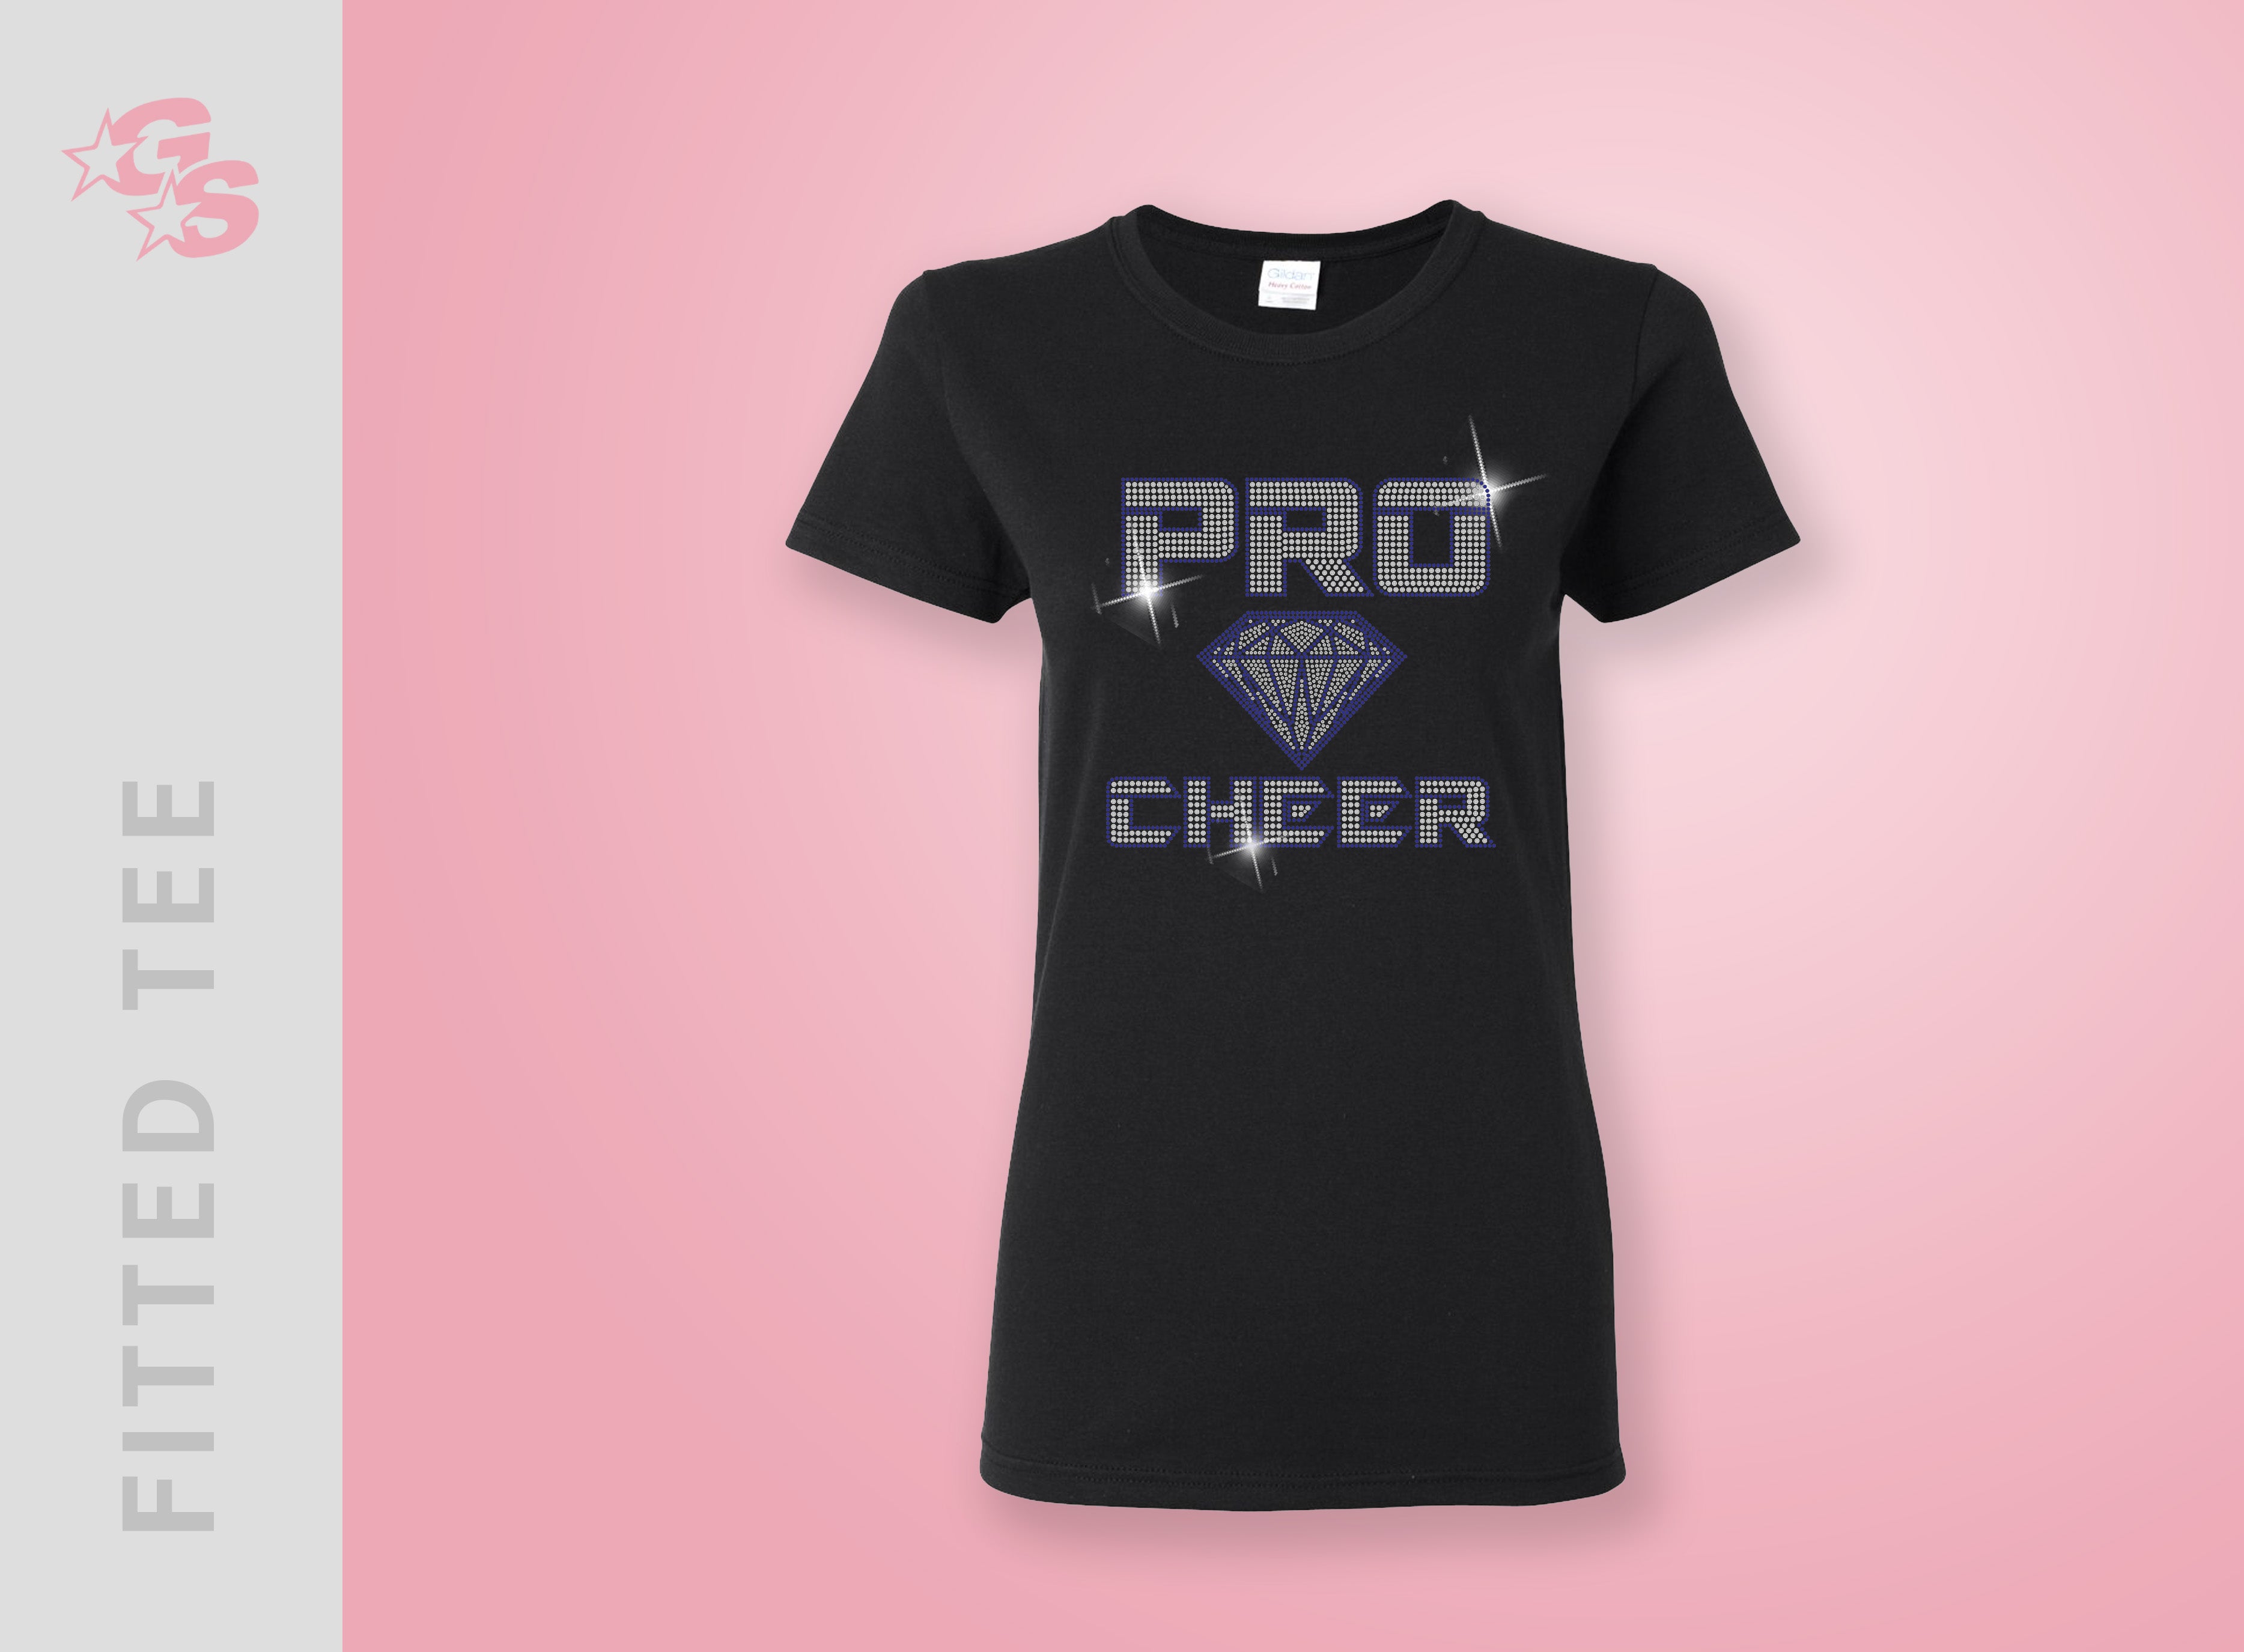 Pro Cheer - Fitted Tee - Black - with White bling logo